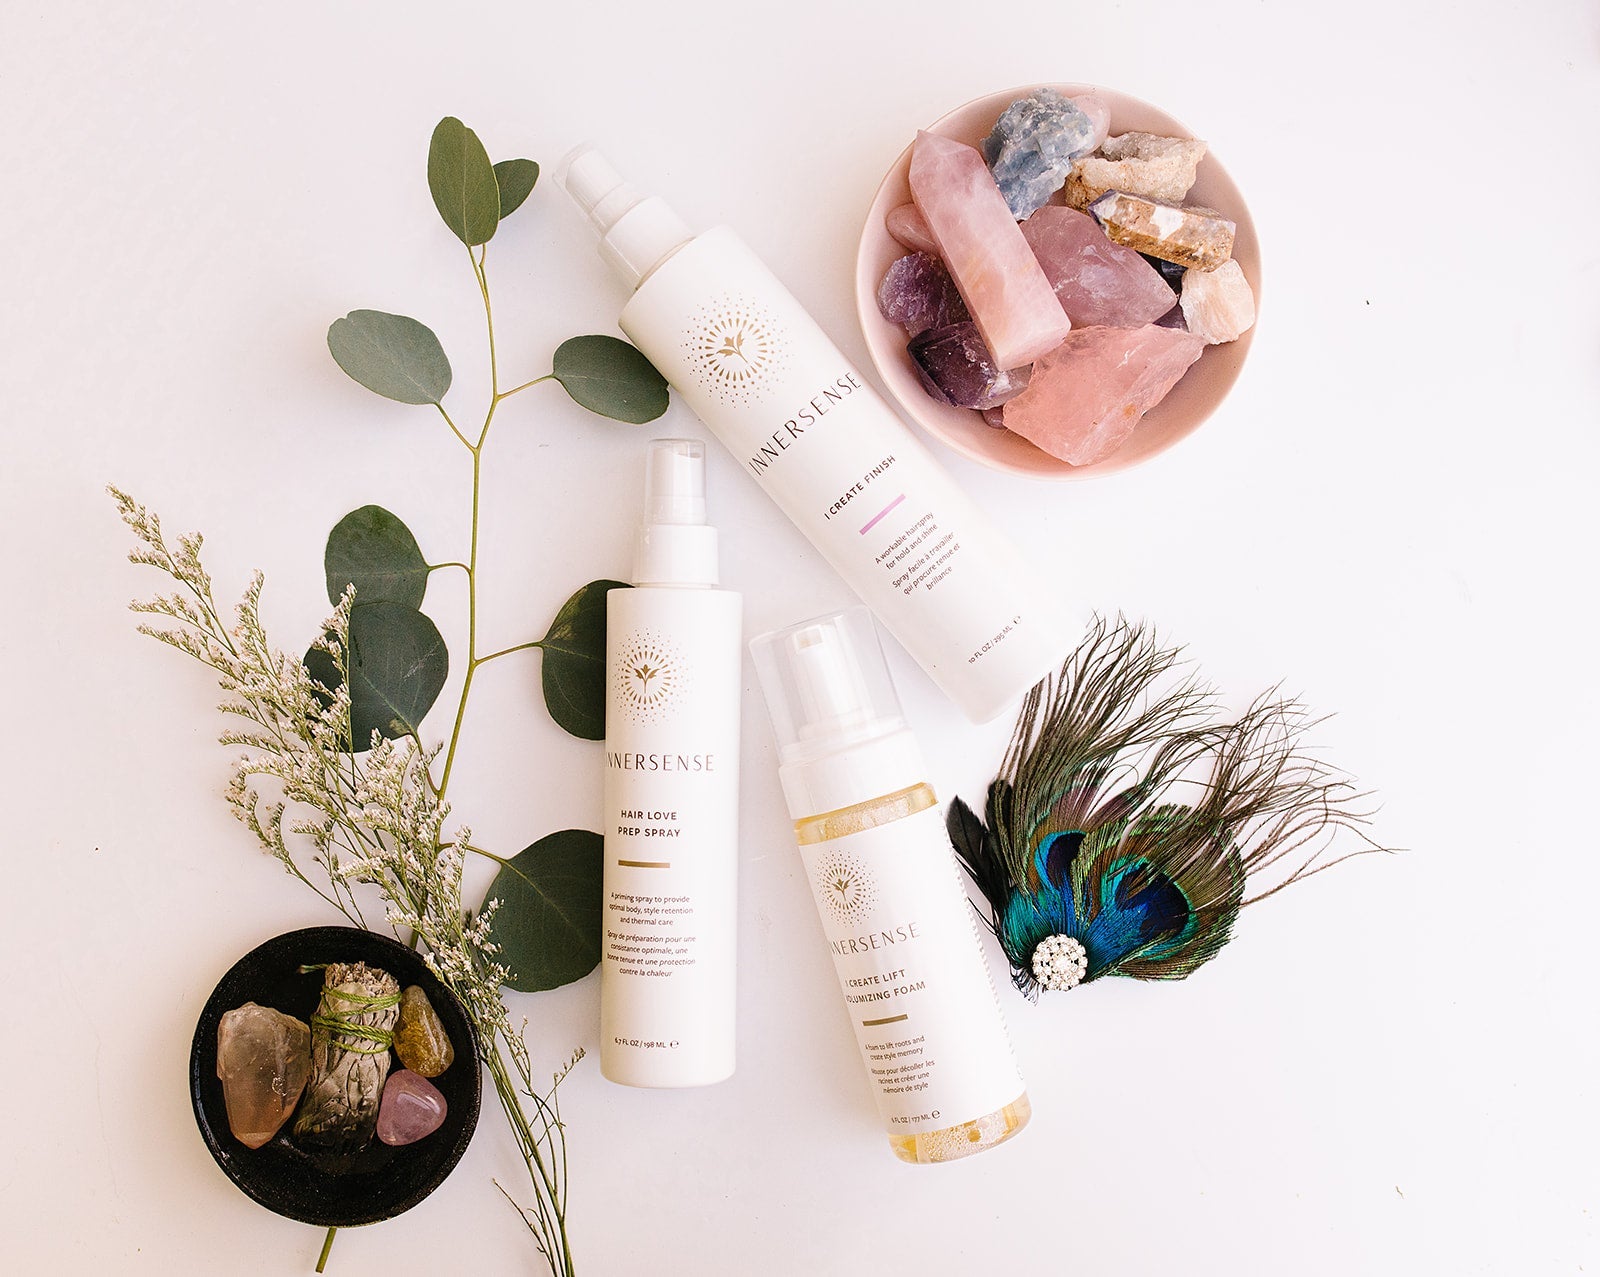 5 Simple Ways to Make the Most of Your Products - Hair Holistic